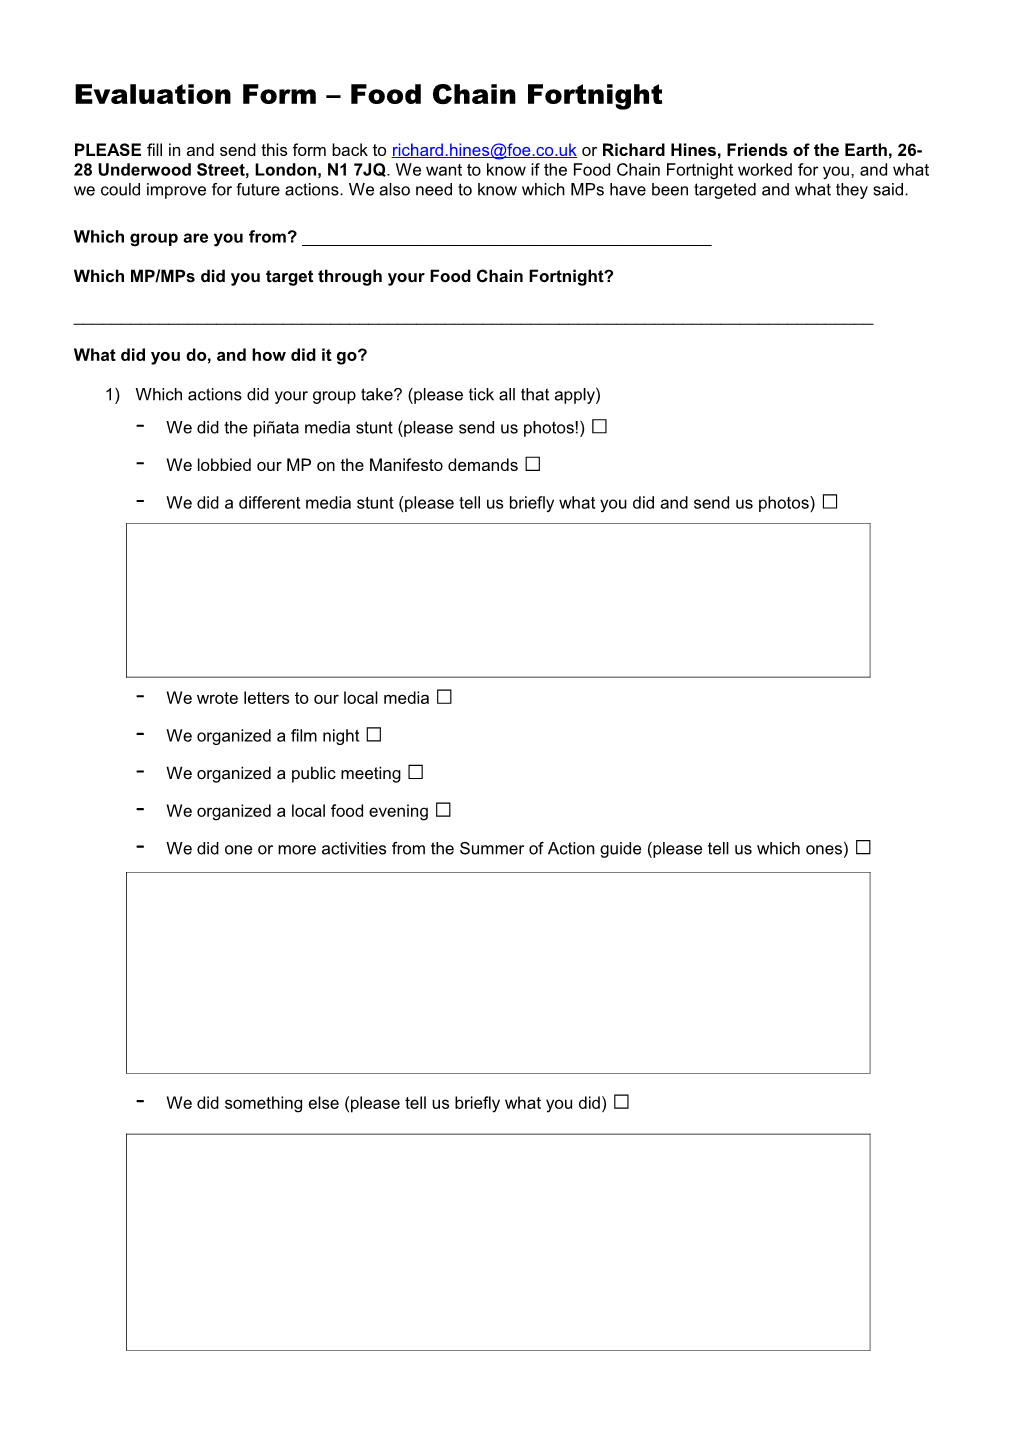 Food Chain Fortnight Evaluation Form